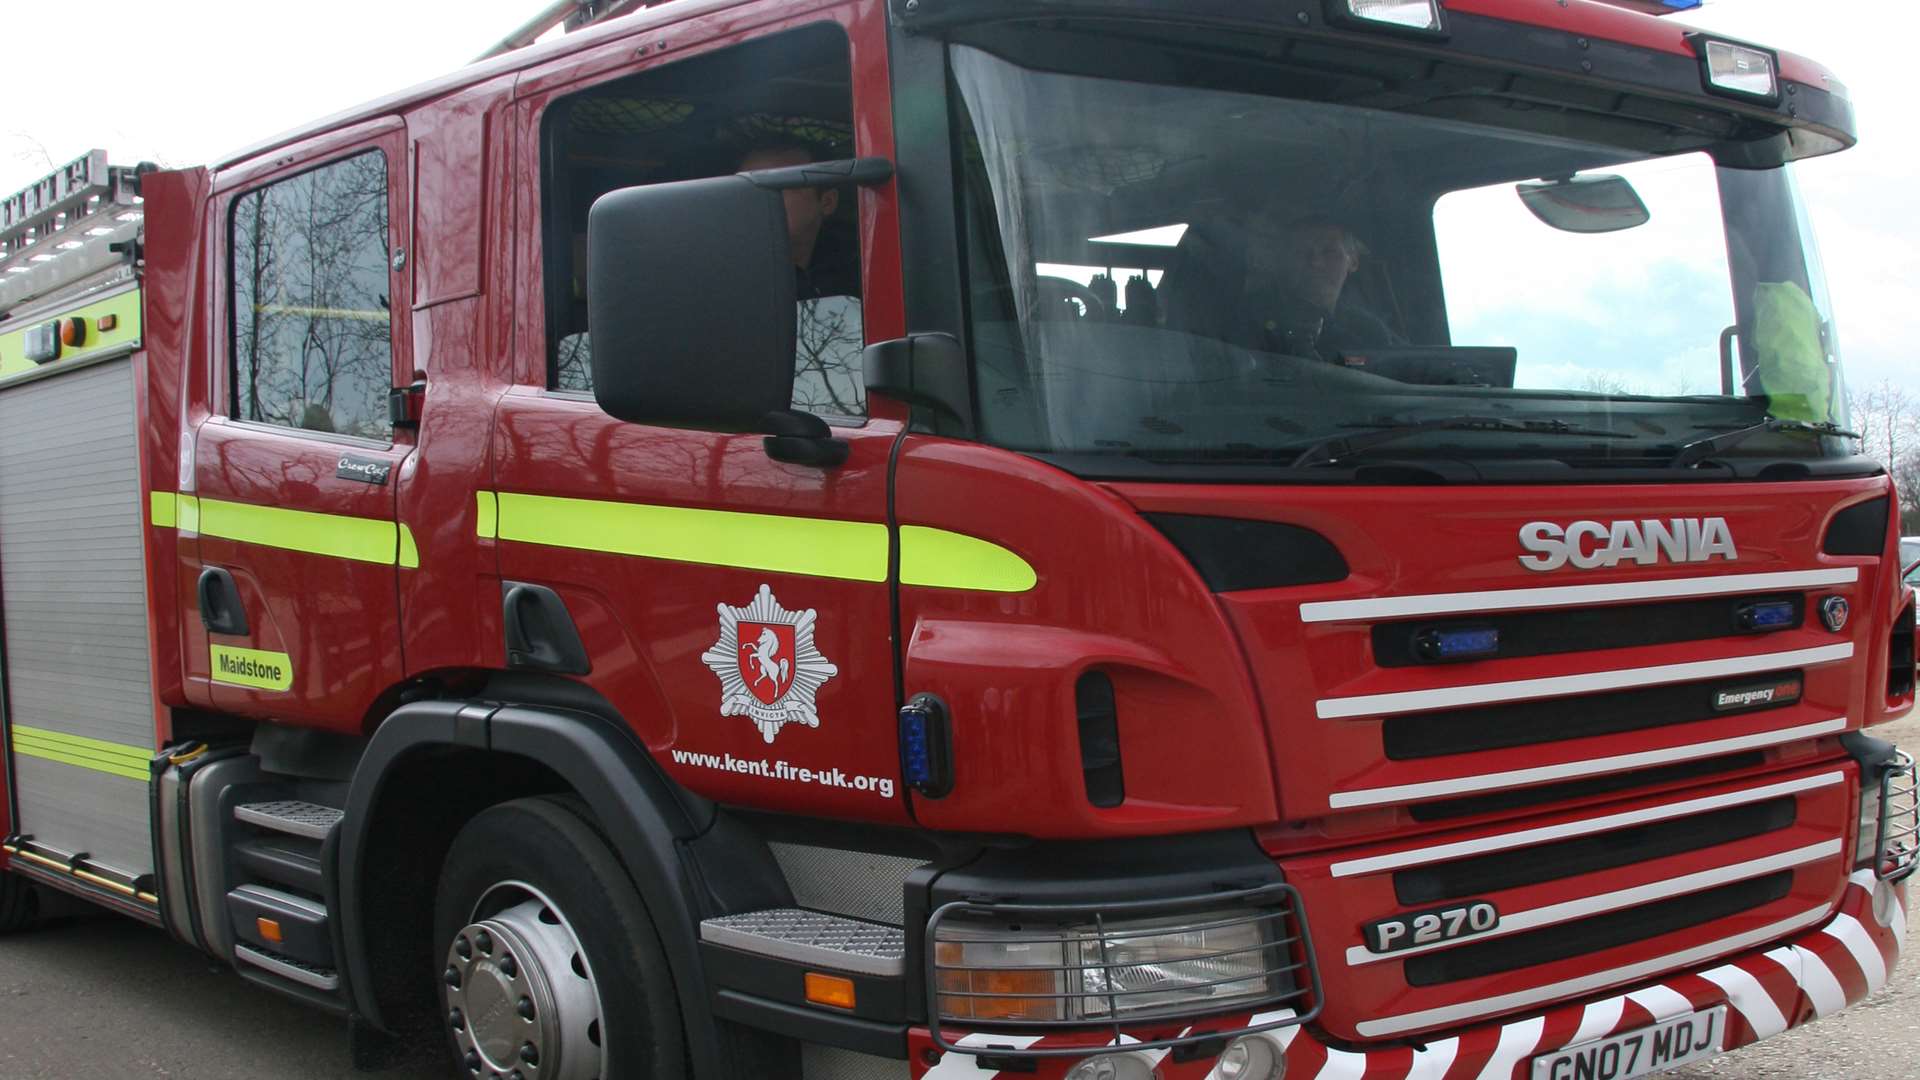 Kent Fire and Rescue Service were called out